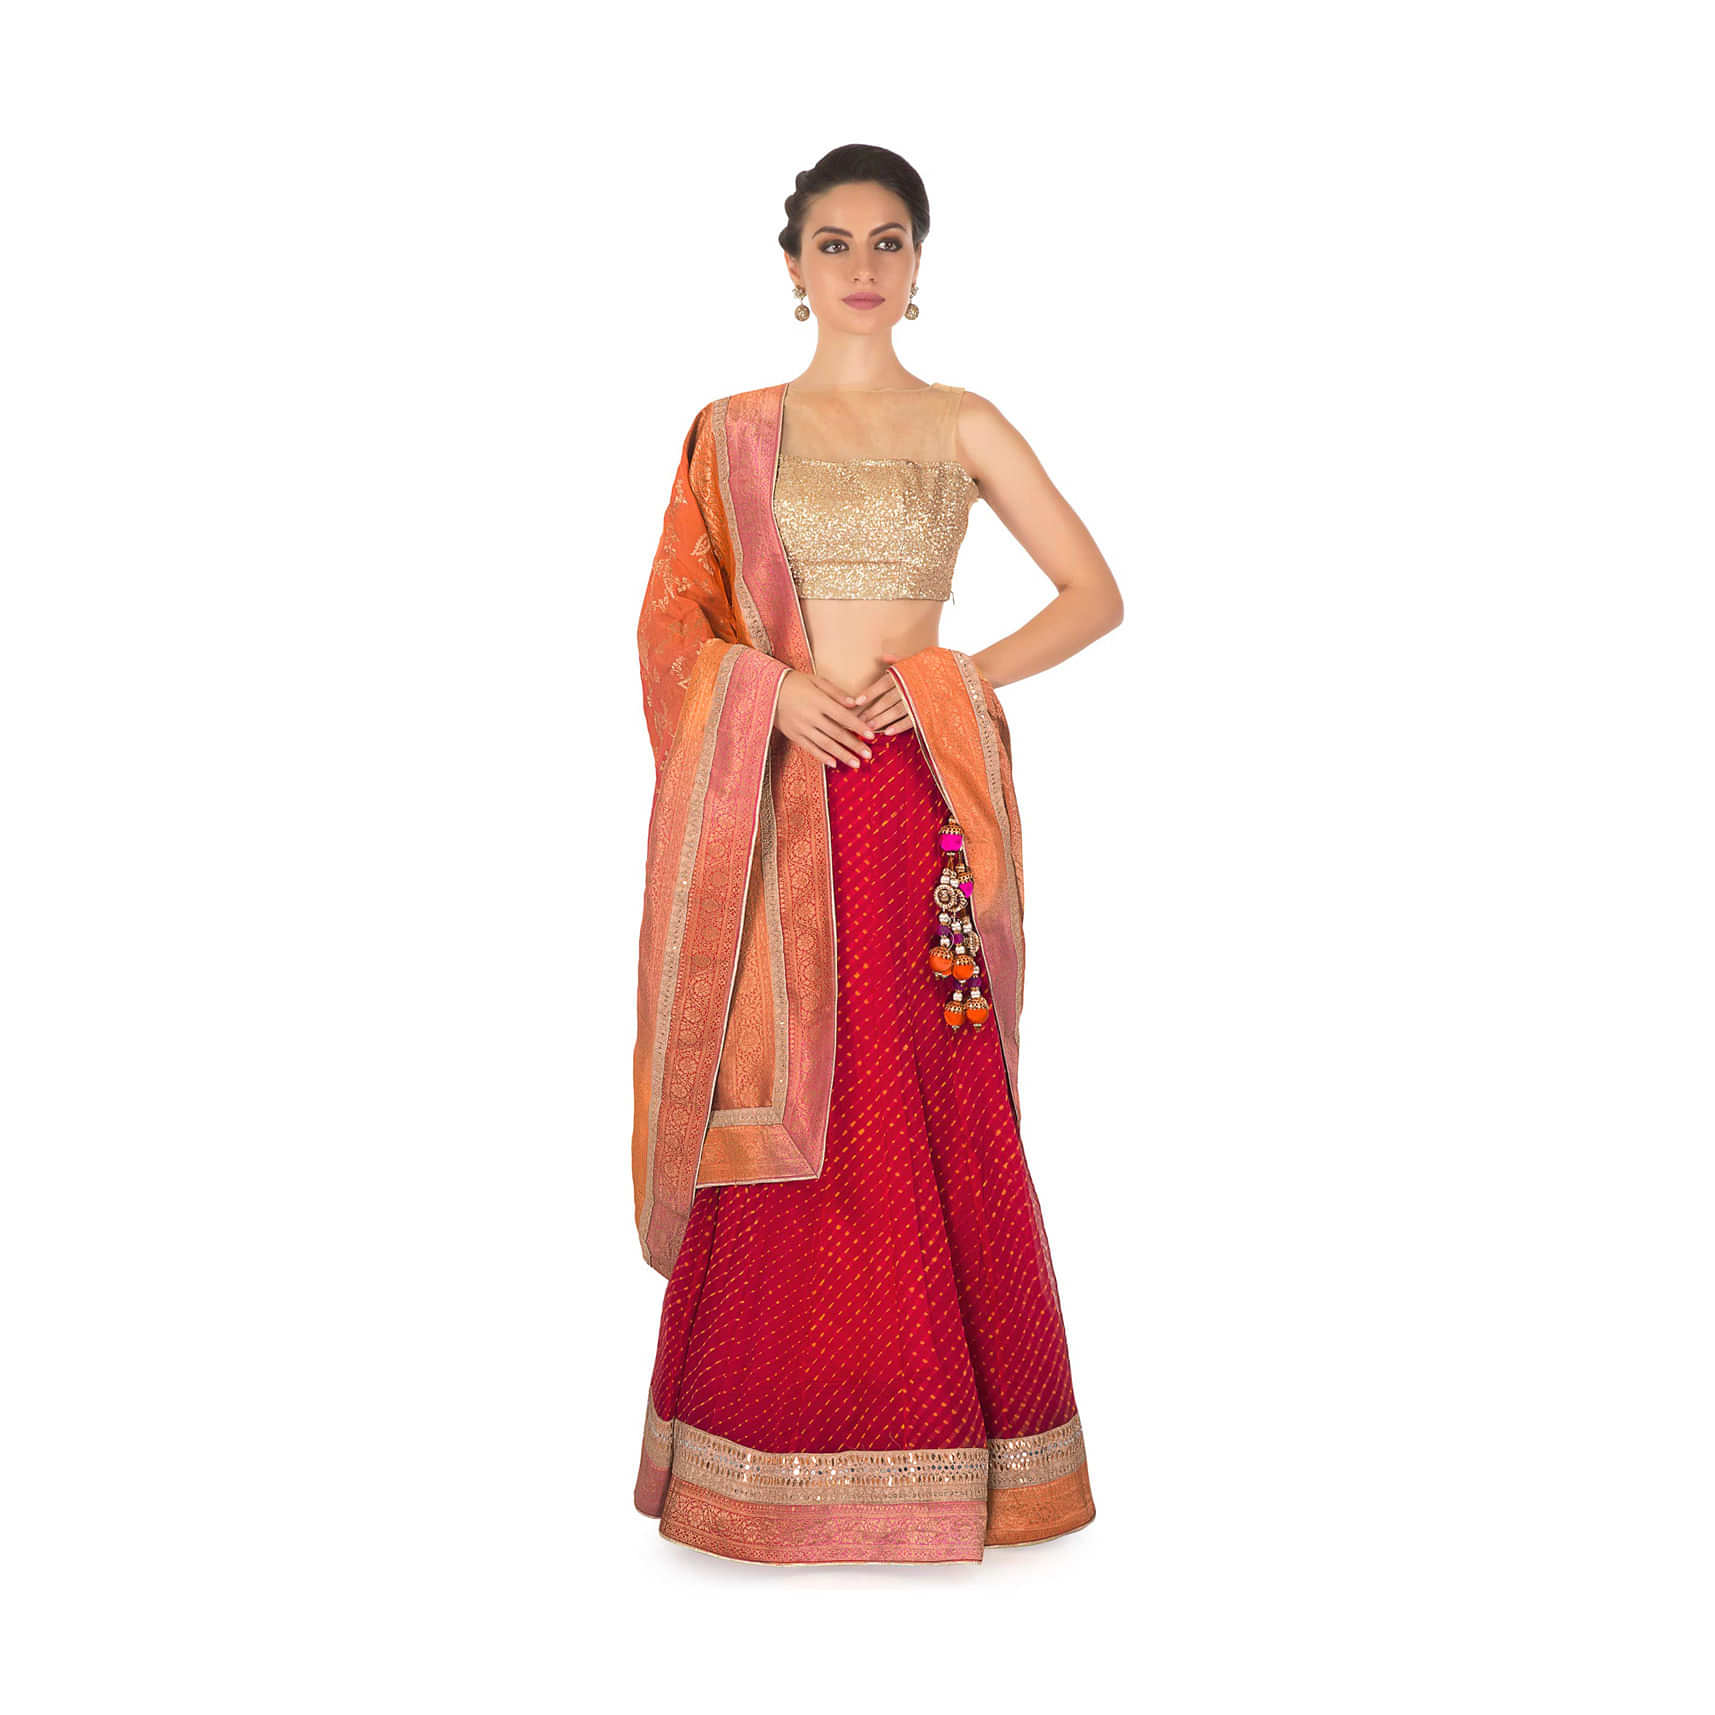 Red leherie georgette lehenga matched with red shaded brocade dupatta 